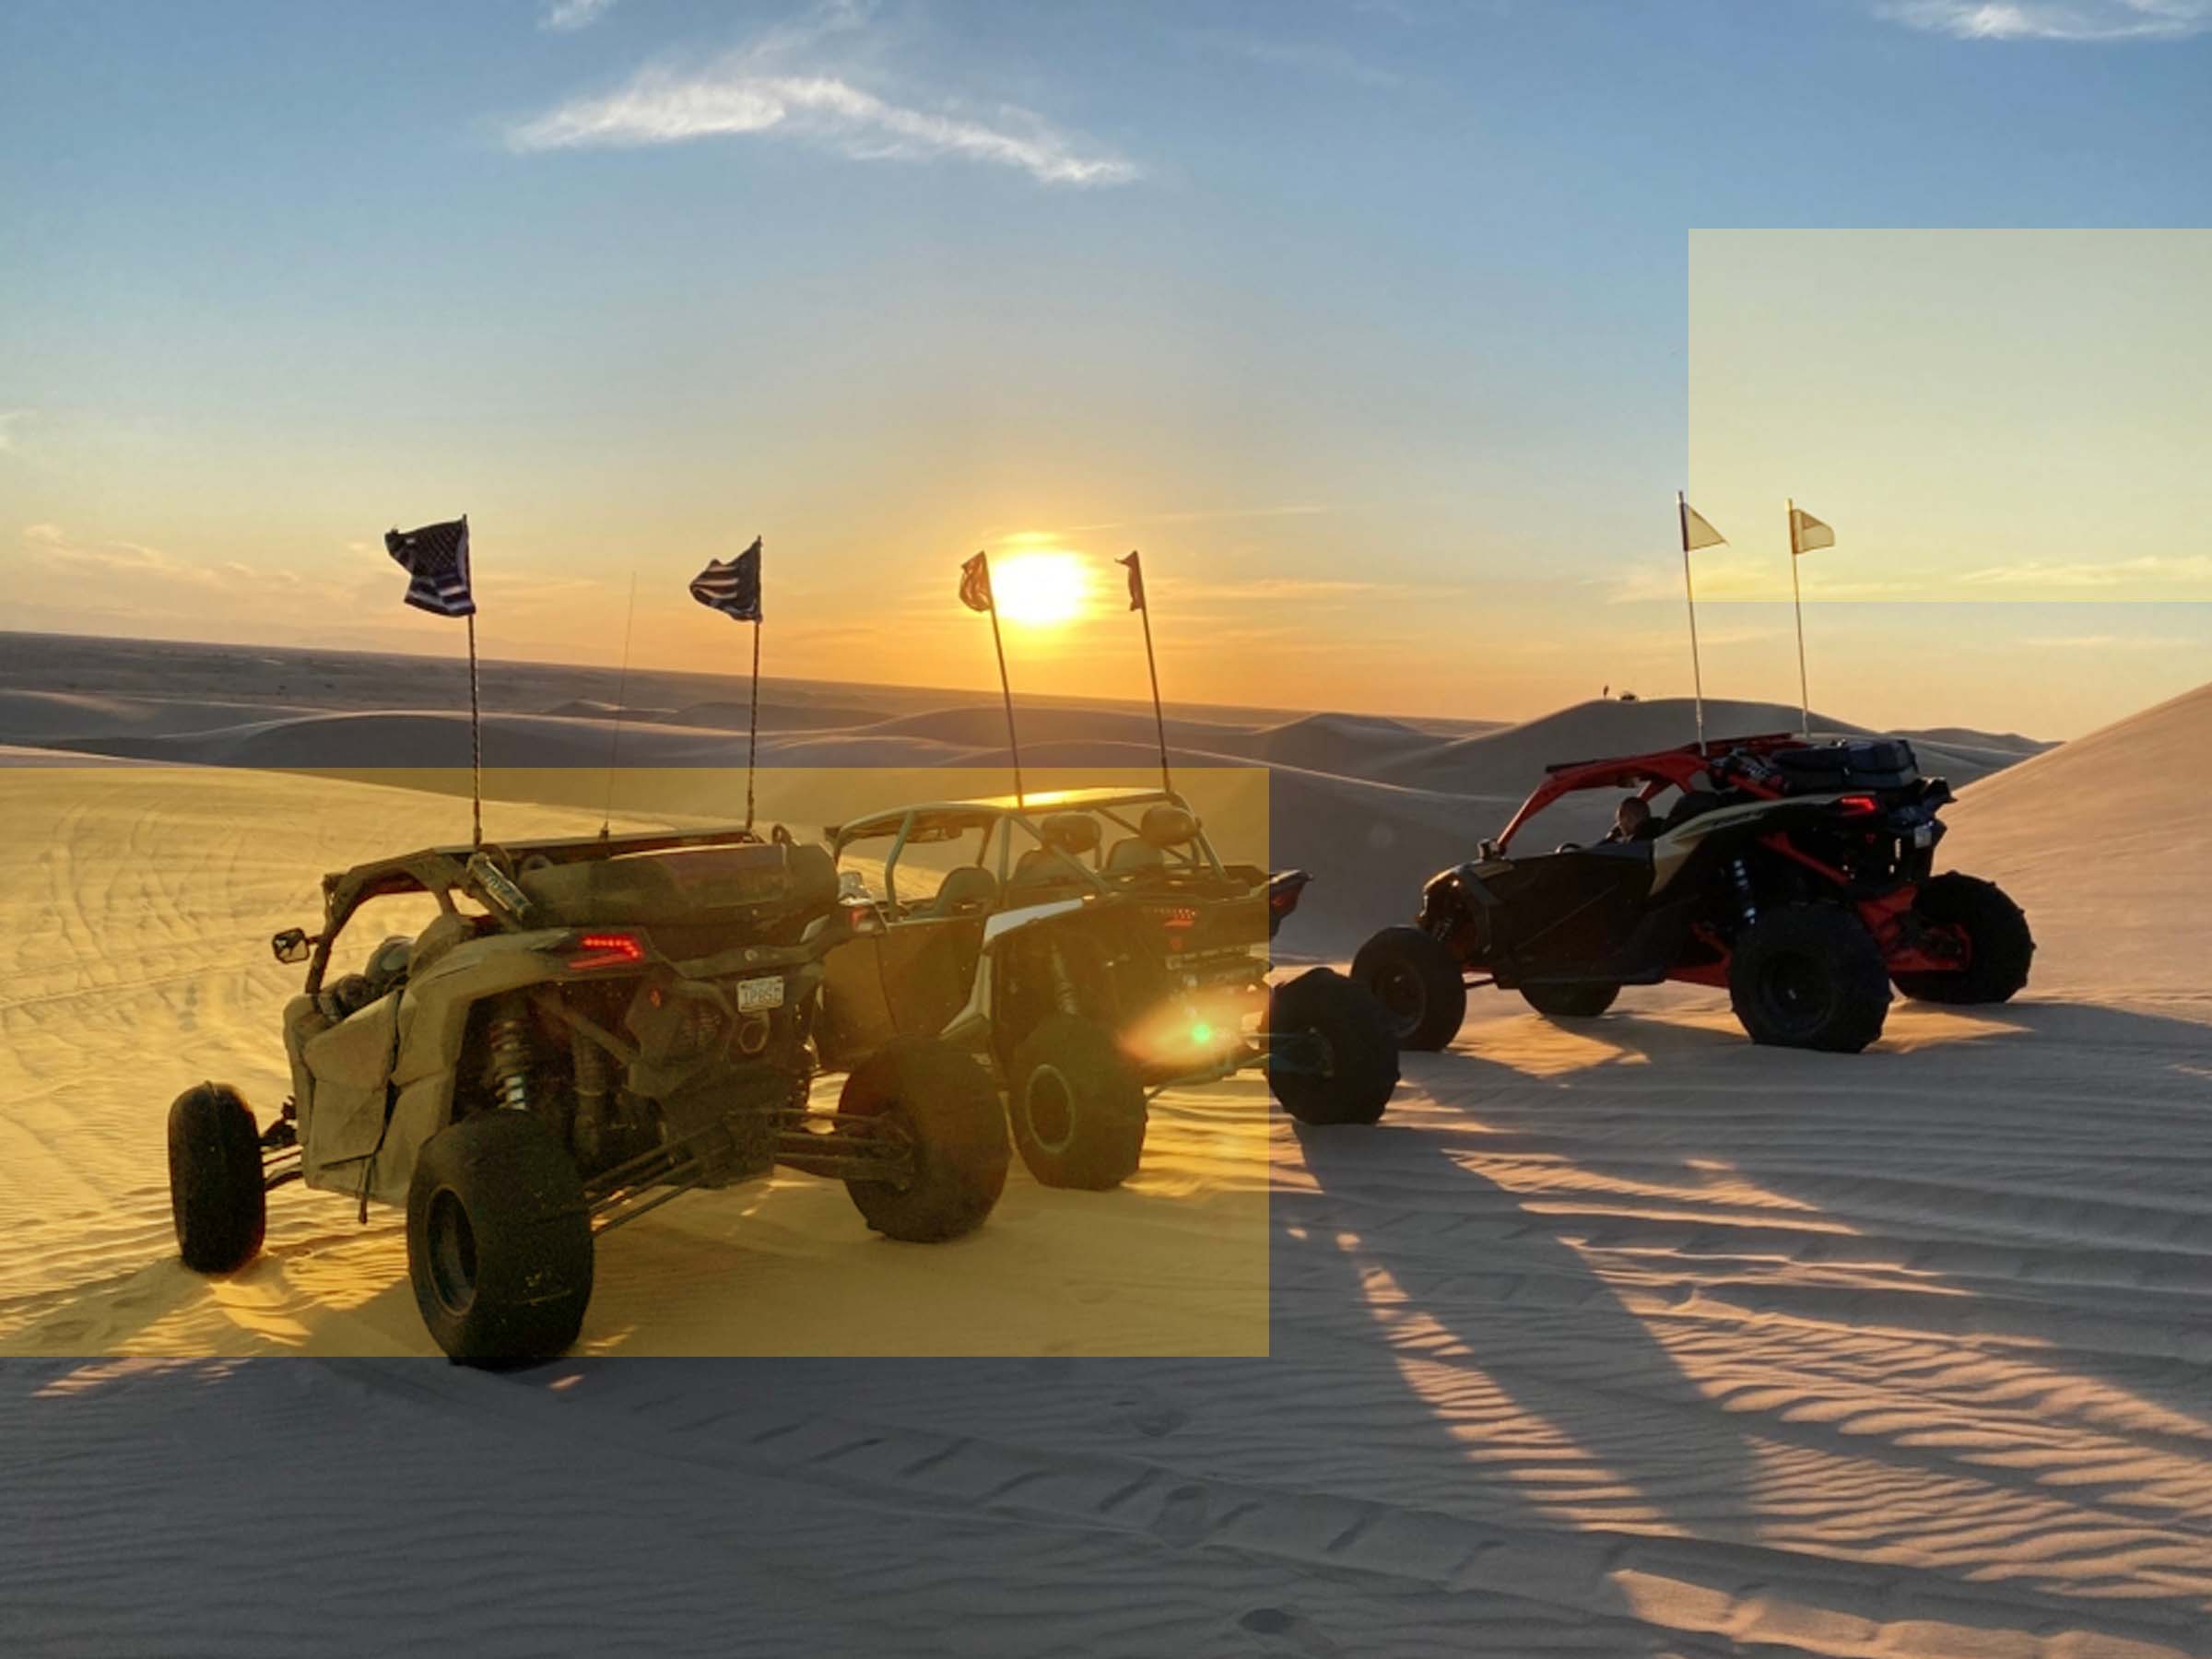 You are currently viewing Safety Tips for Dubai Desert Dune Buggy Adventure 